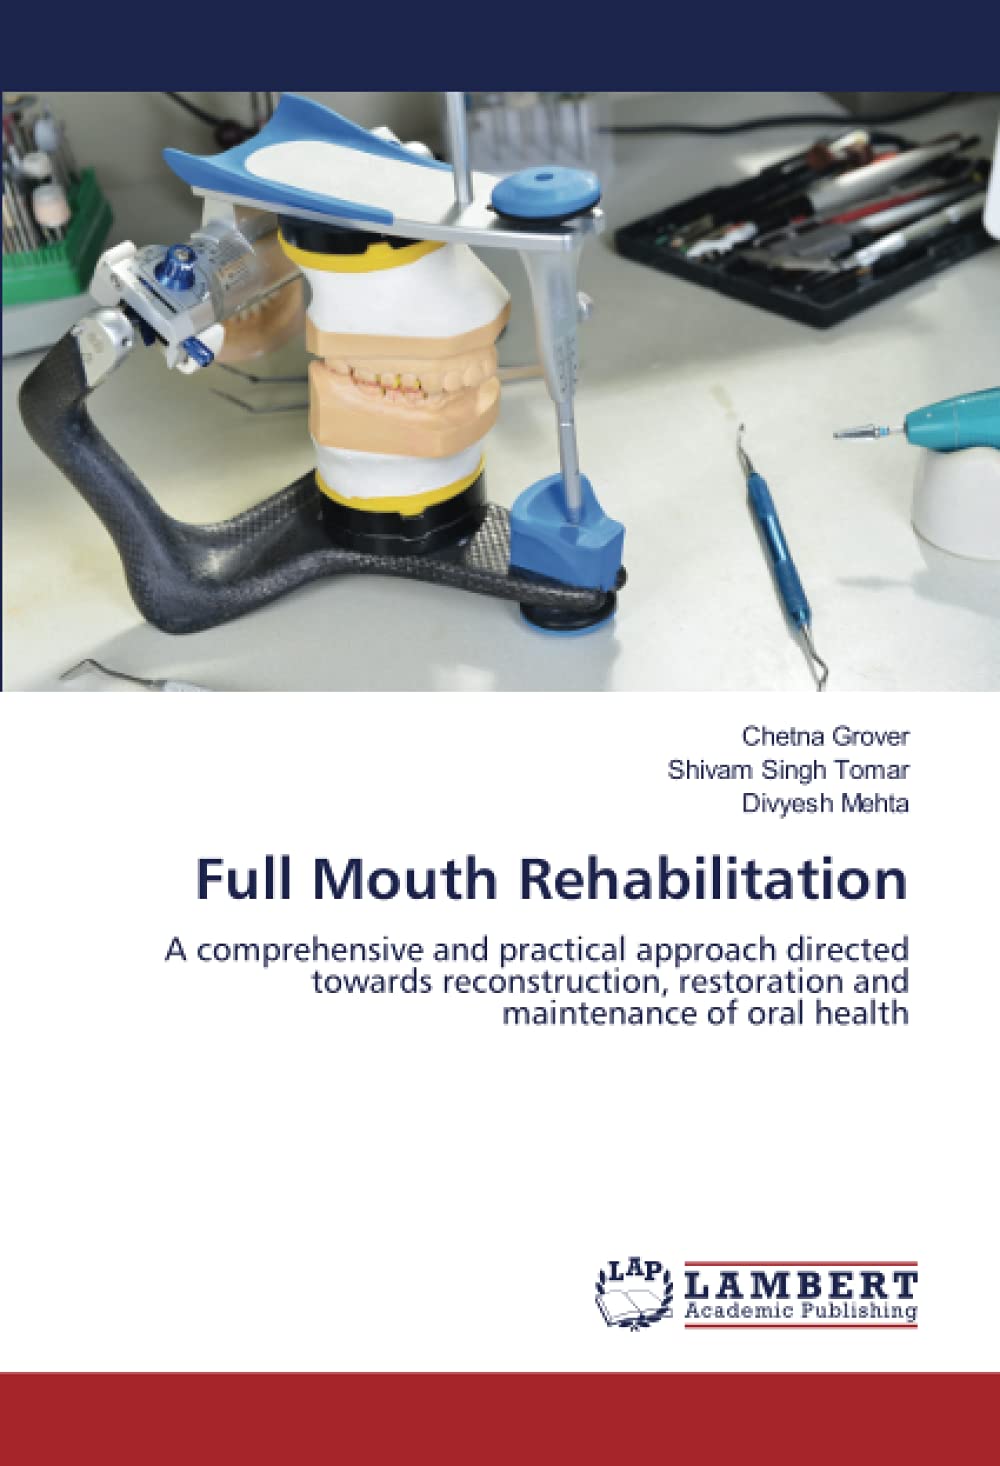 Full Mouth Rehabilitation: A comprehensive and practical approach directed towards reconstruction, restoration and maintenance of oral health